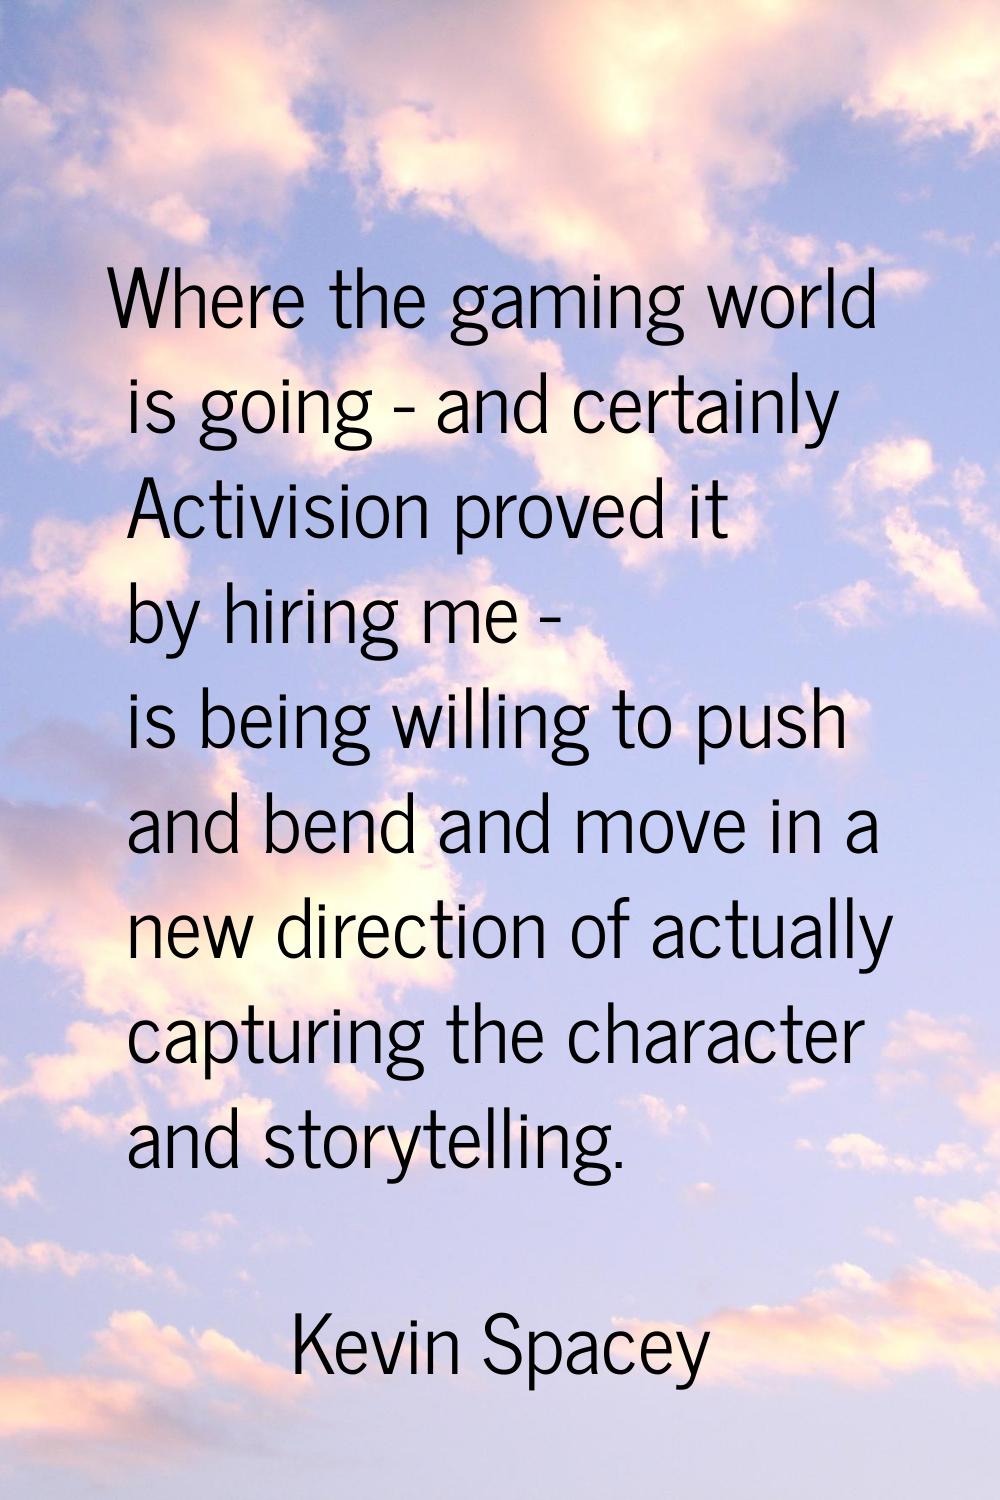 Where the gaming world is going - and certainly Activision proved it by hiring me - is being willin